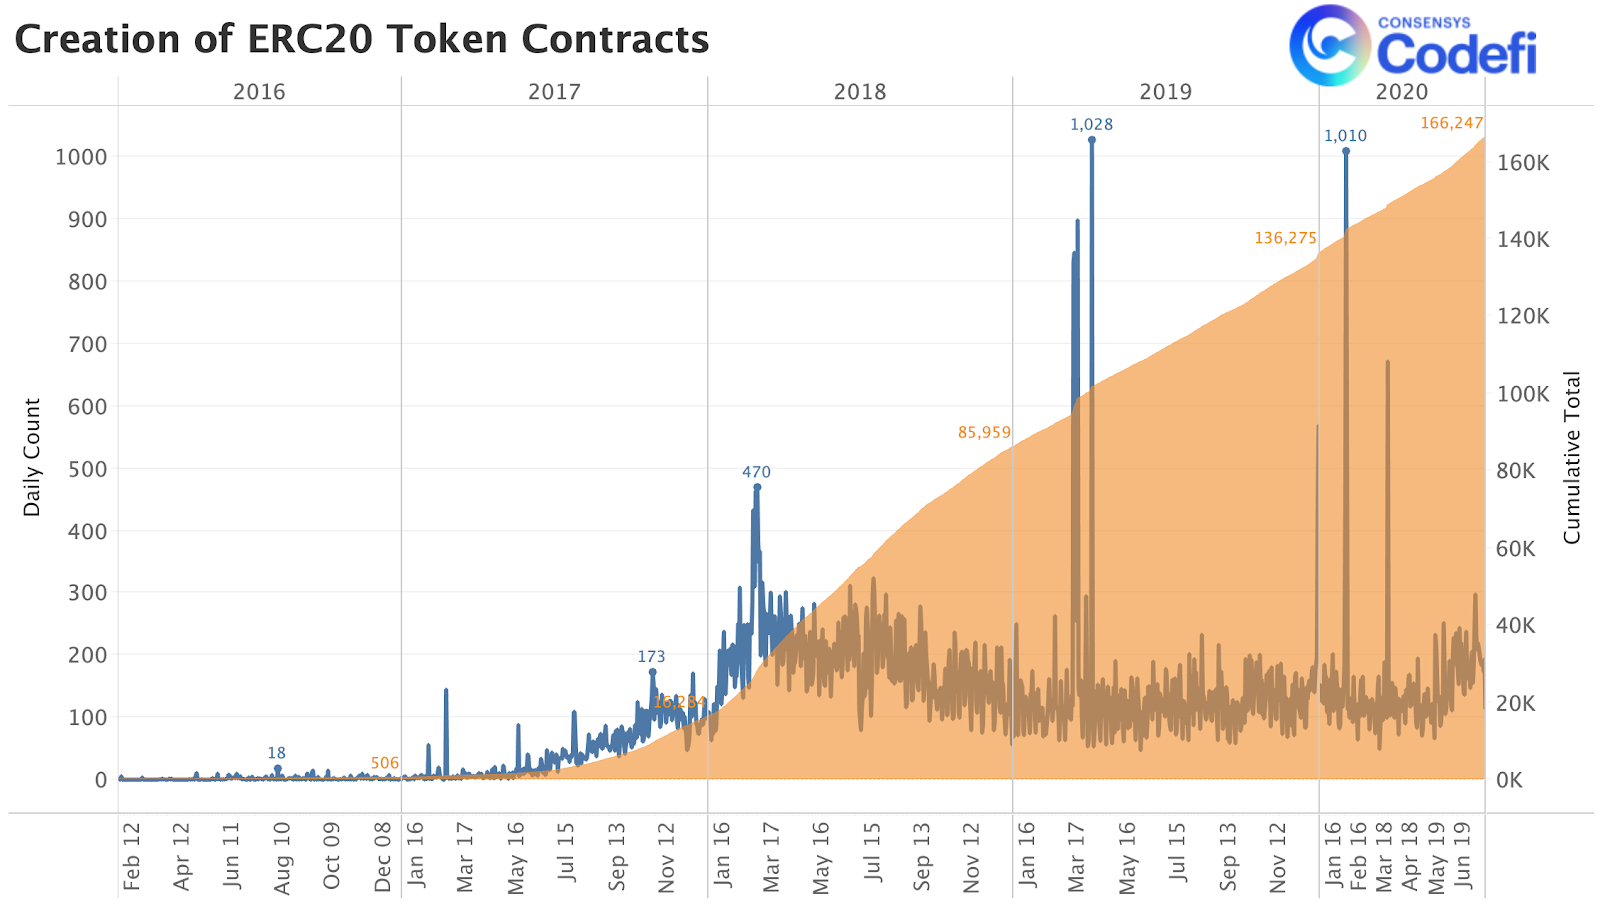 The creation of ERC-20 token contracts on Ethereum.